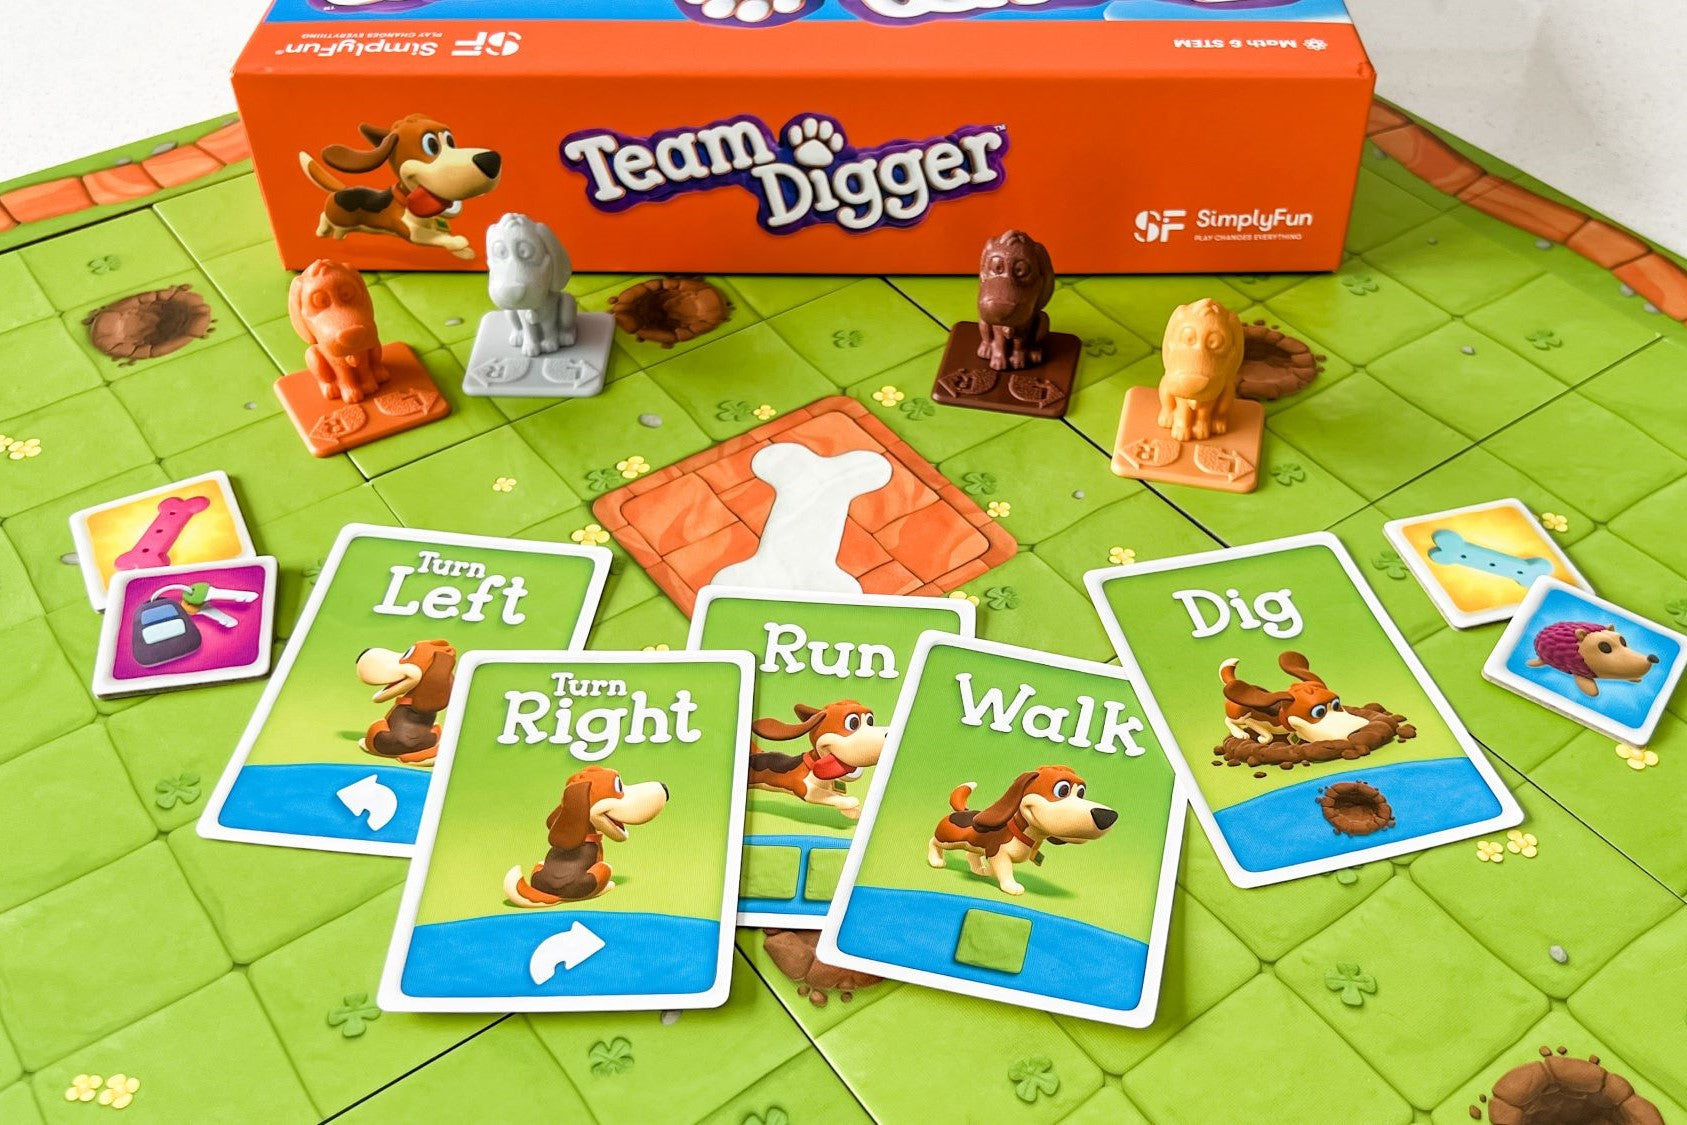 Game Cows review of Team Digger